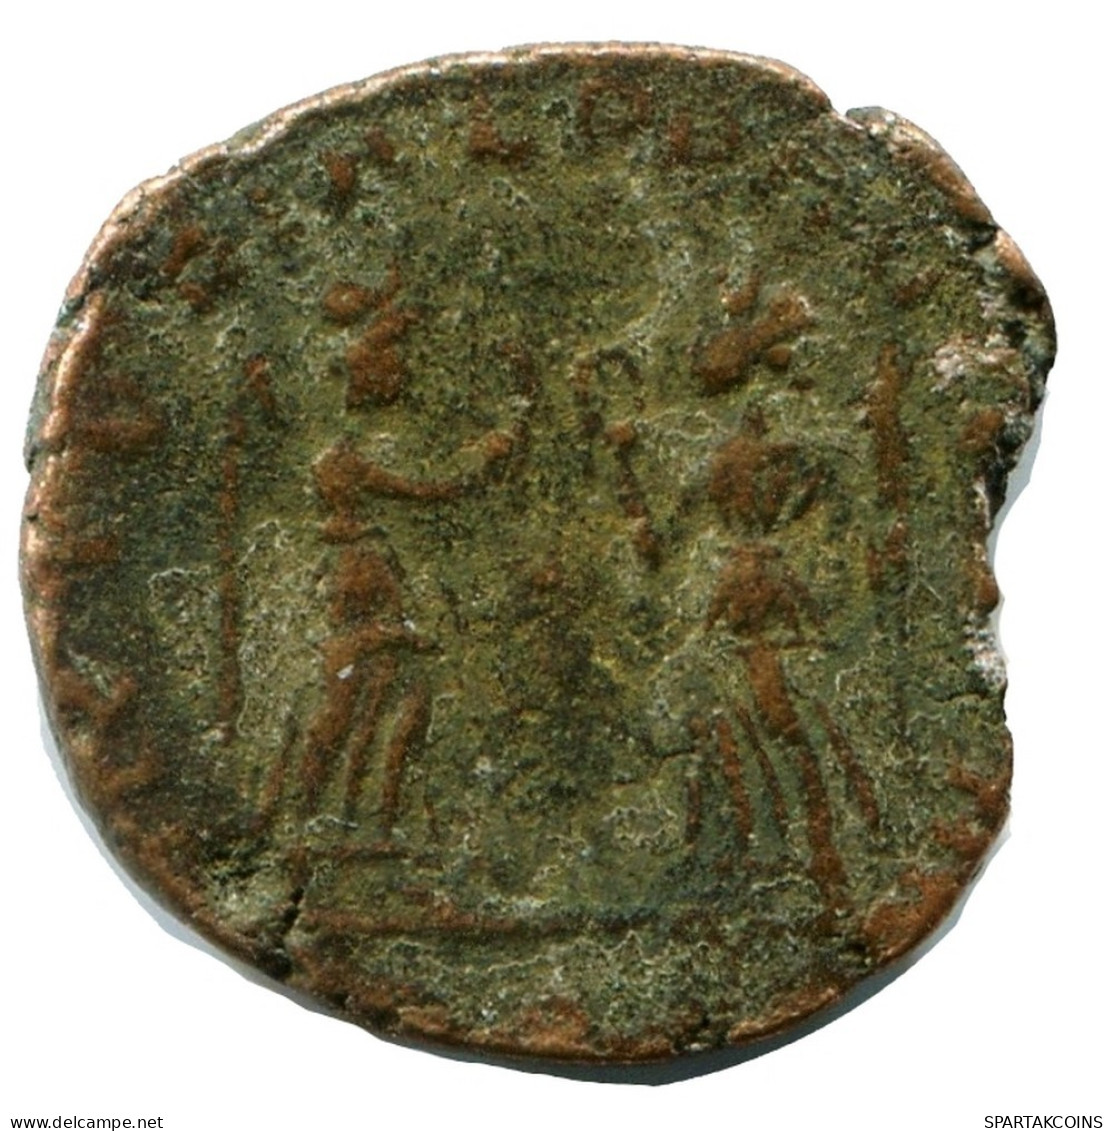 CONSTANS MINTED IN ROME ITALY FOUND IN IHNASYAH HOARD EGYPT #ANC11527.14.F.A - The Christian Empire (307 AD To 363 AD)